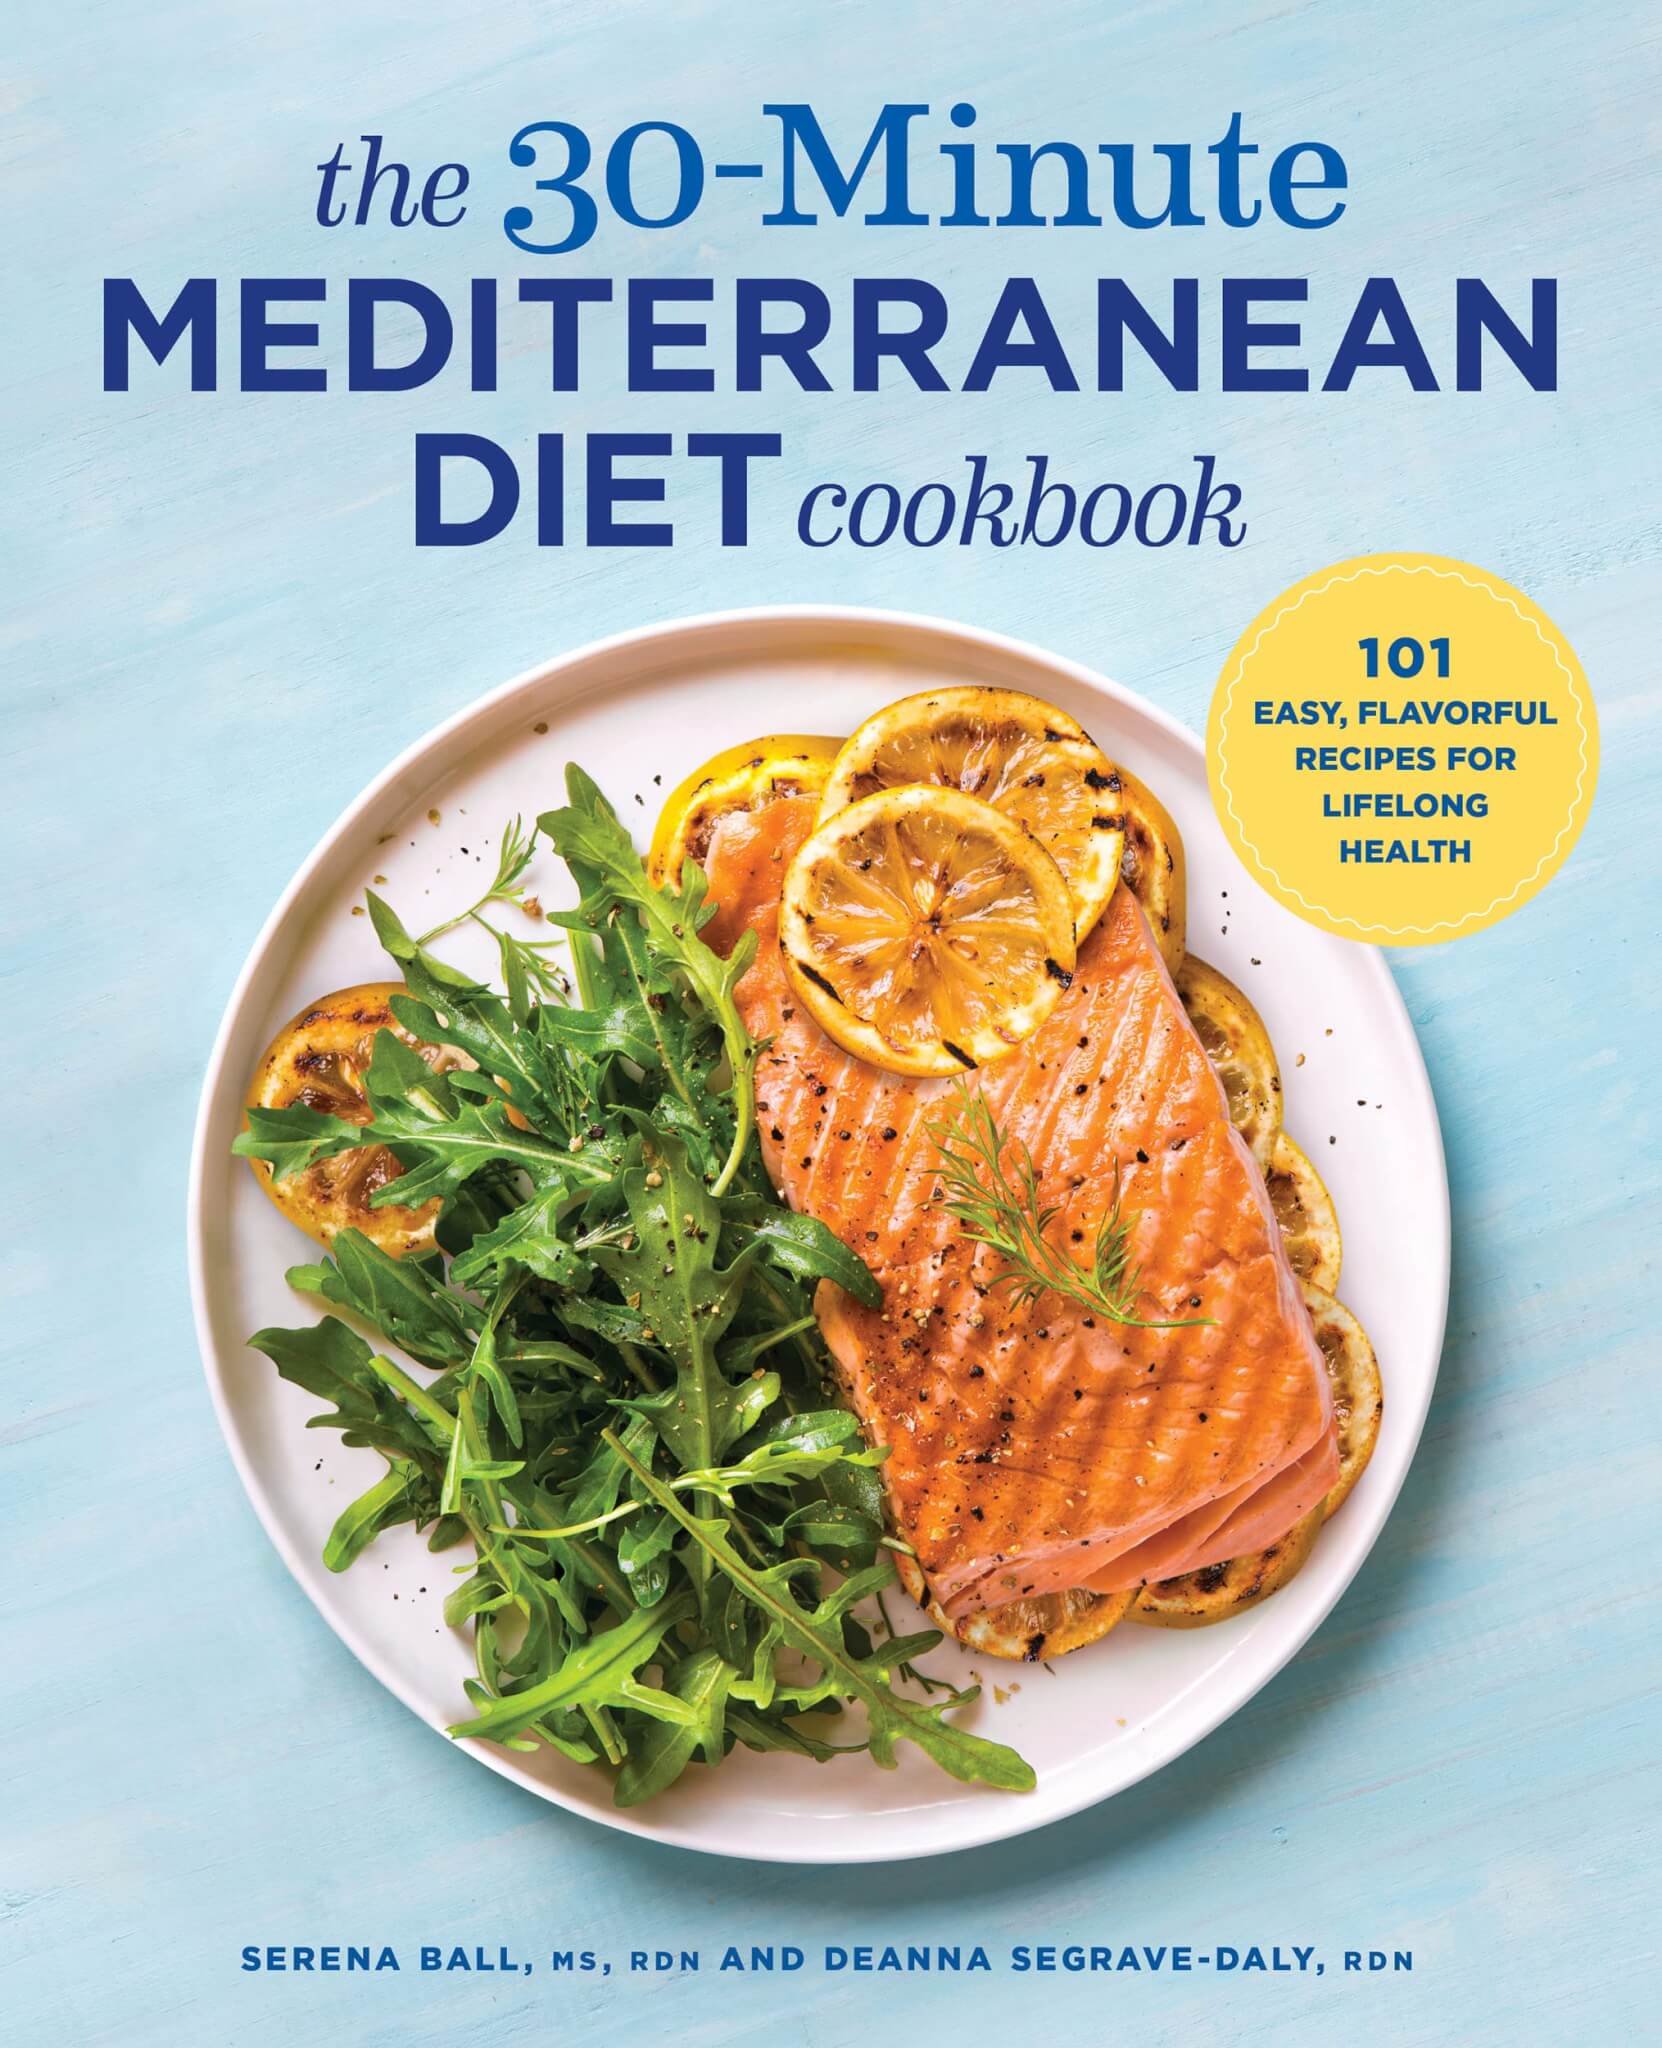 The 30-Minute Mediterranean Diet Cookbook by Deanna Segrave-Daly and Serena Ball